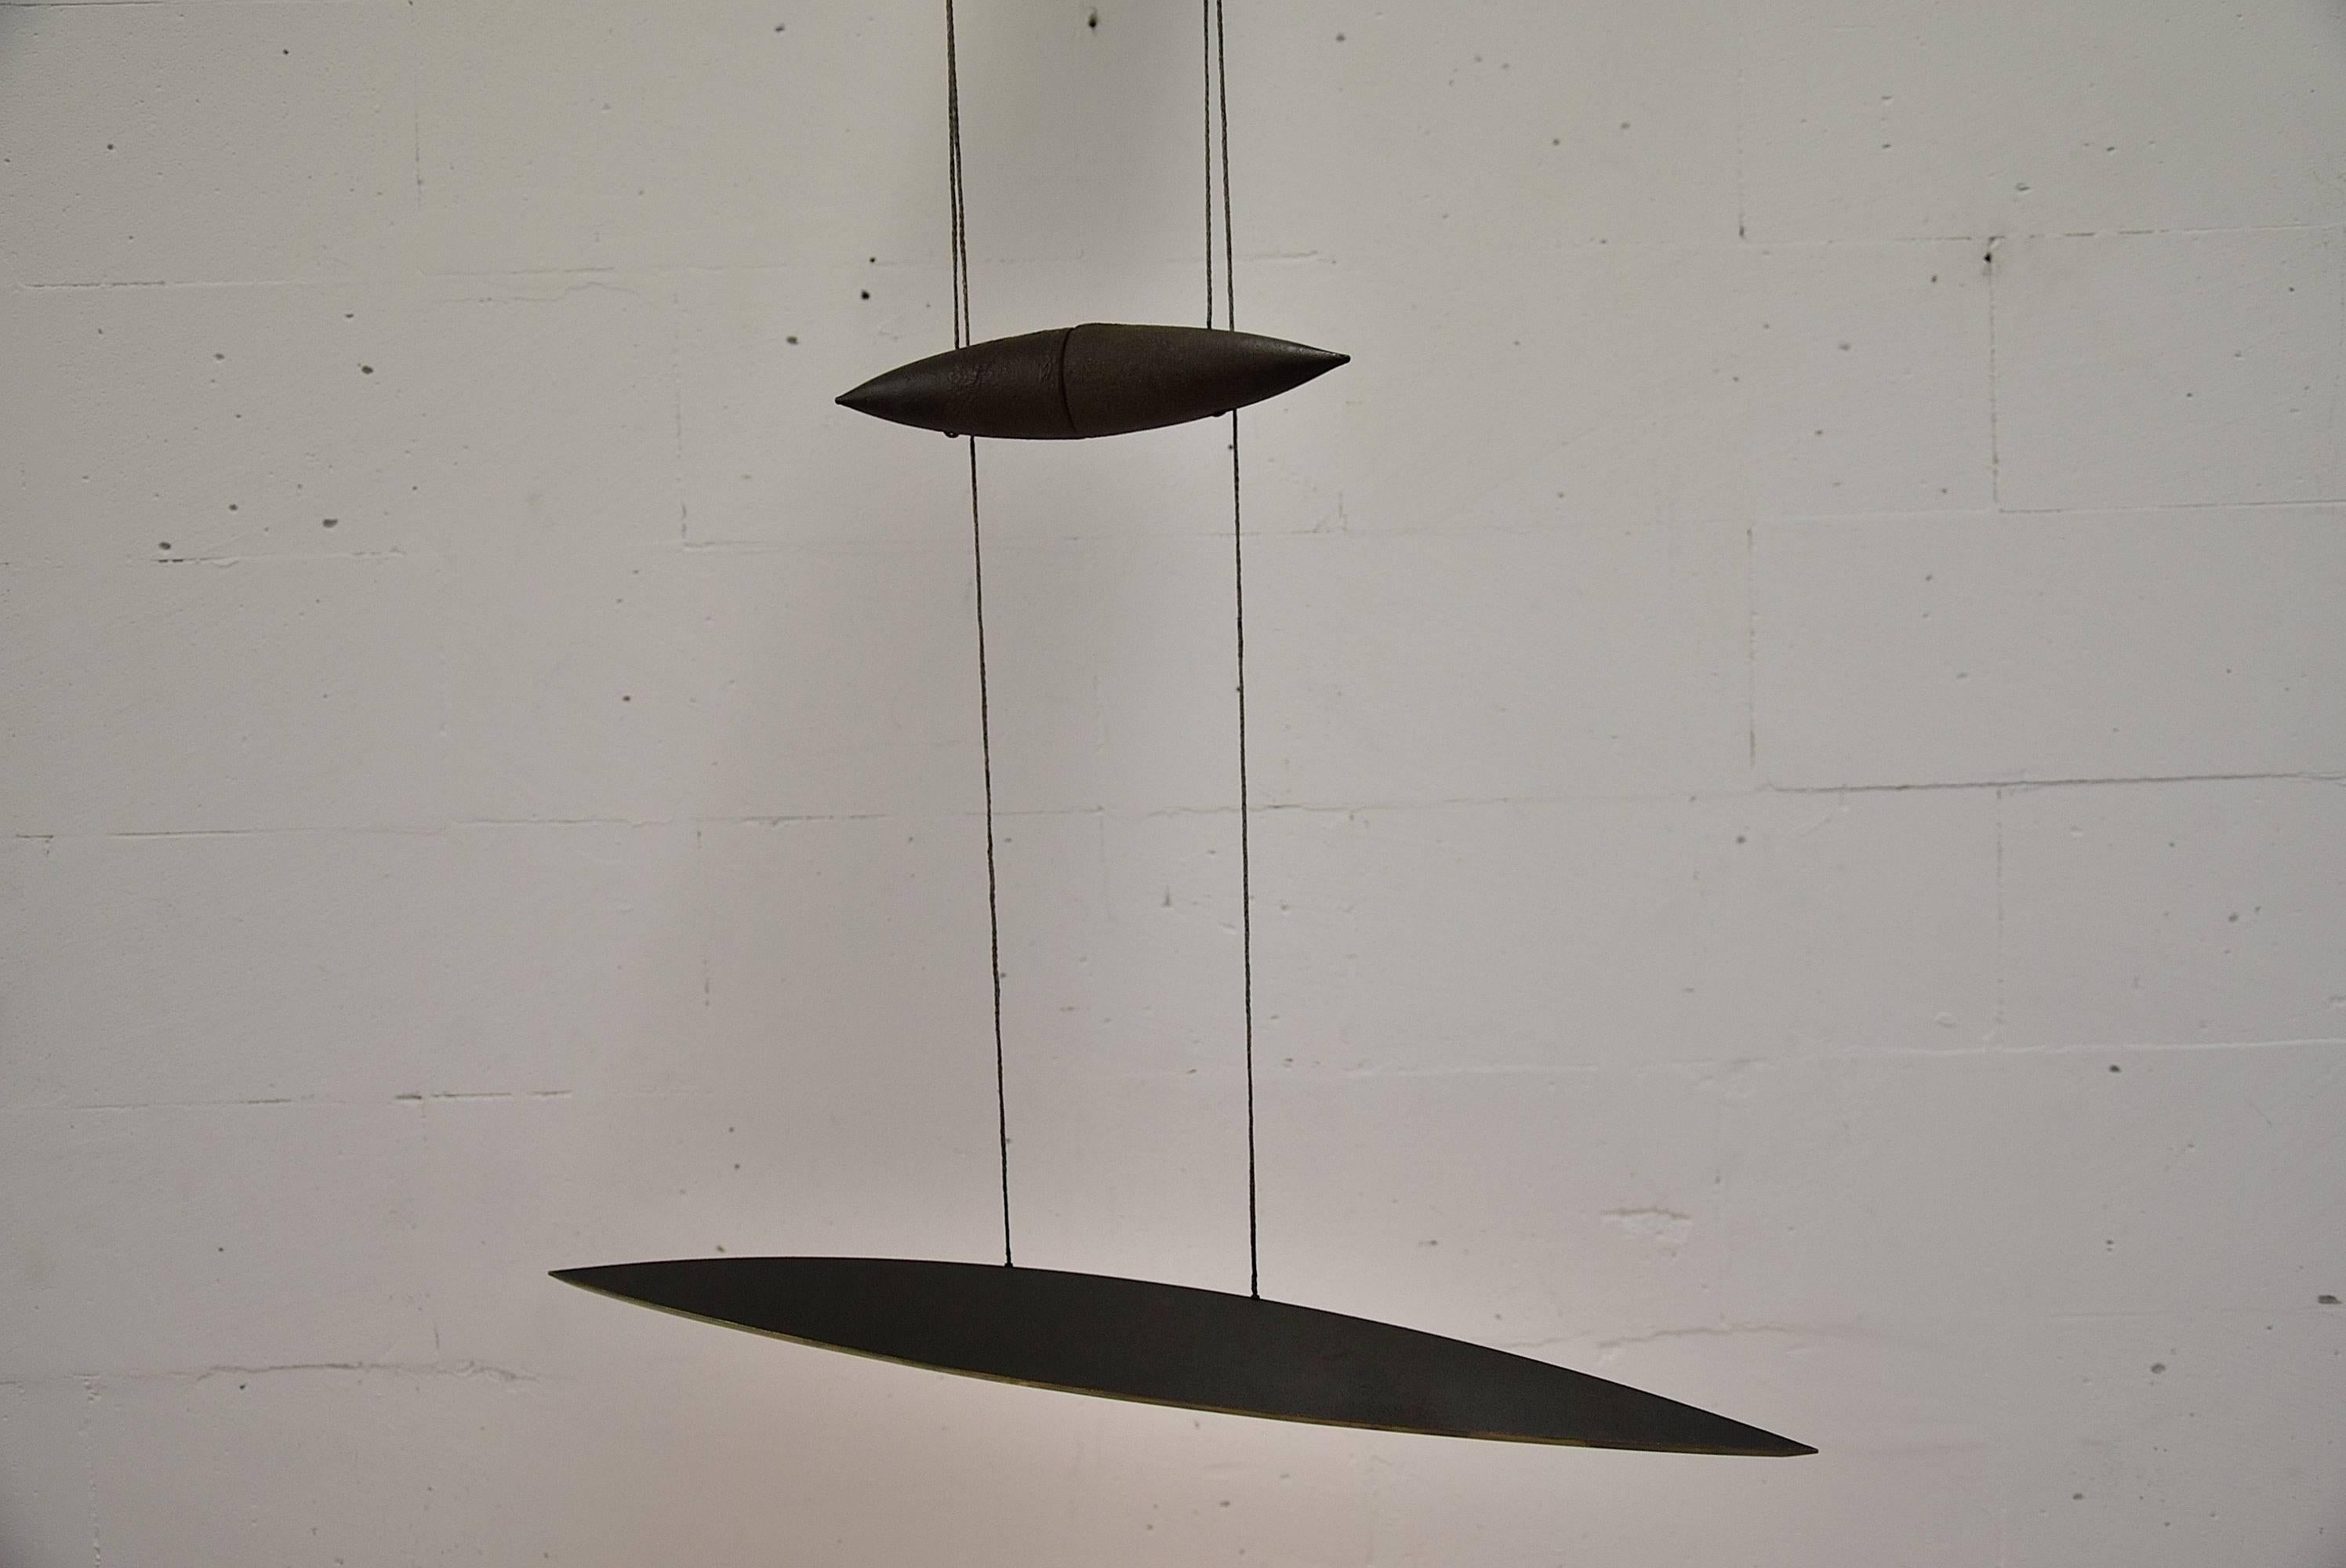 Solid Raw Bronze Tai Lang 1990s pendant fixture by Tobias Grau out of production.

The shape, material and light make Tai Lang a very special pendant fixture. 
The shade of high-grade metals is balanced by a counterweight of the same material,